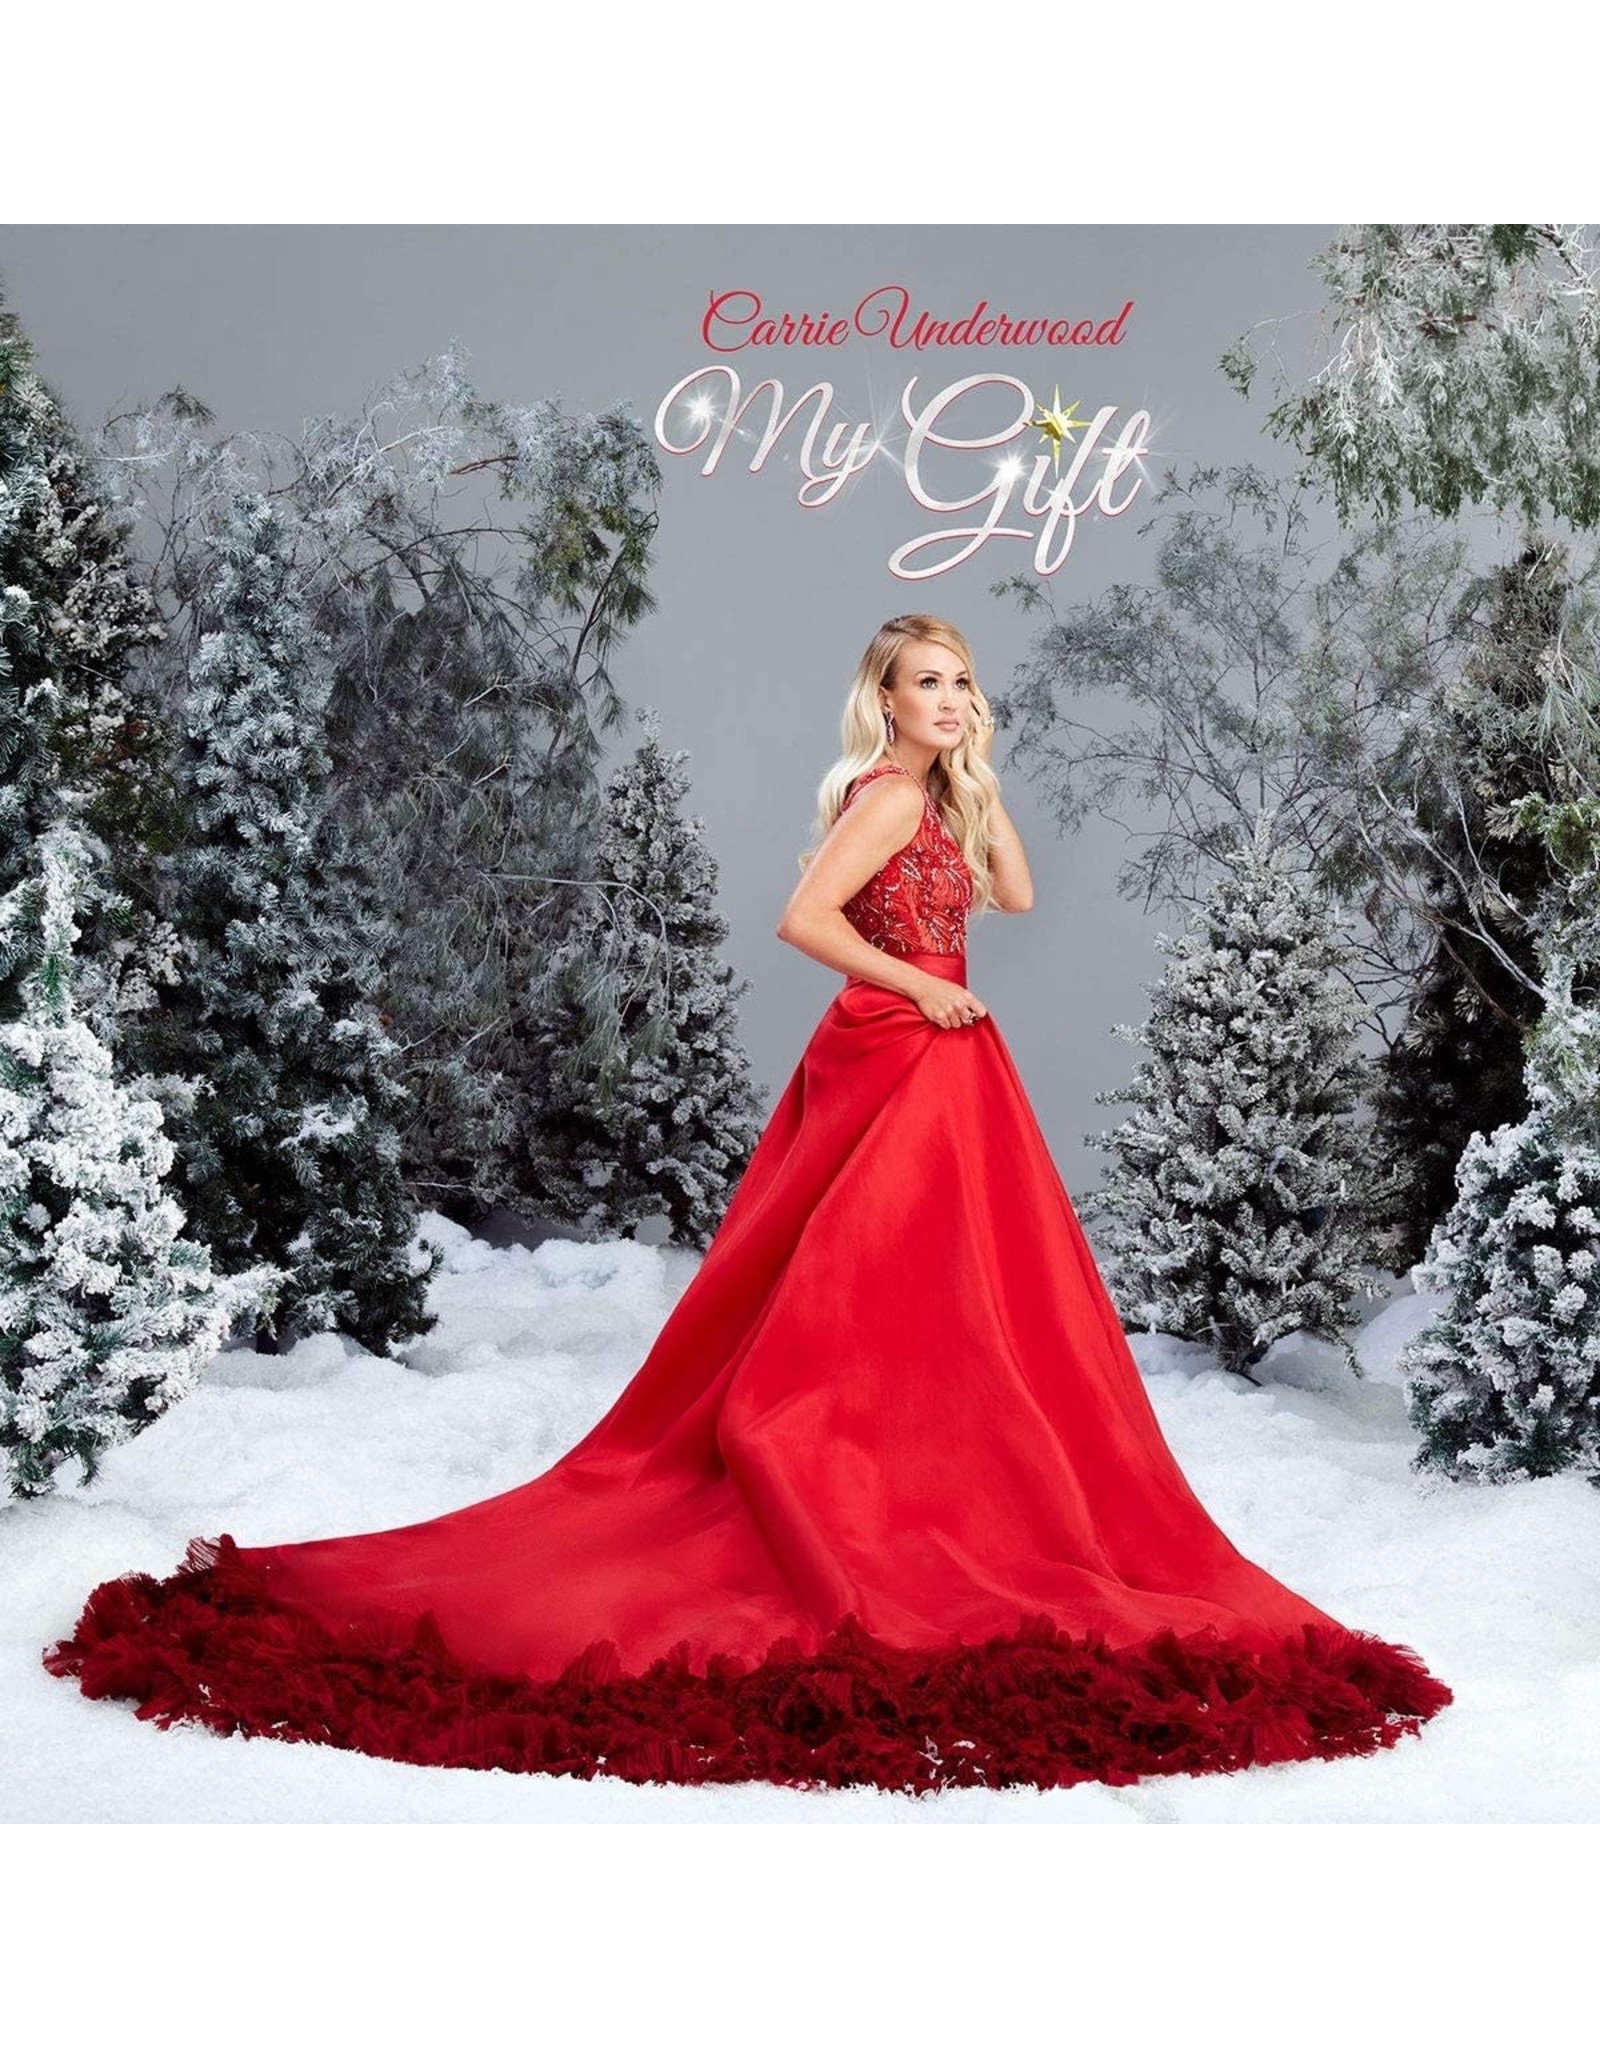 Carrie Underwood  - My Gift (Deluxe Edition) [Clear Vinyl]